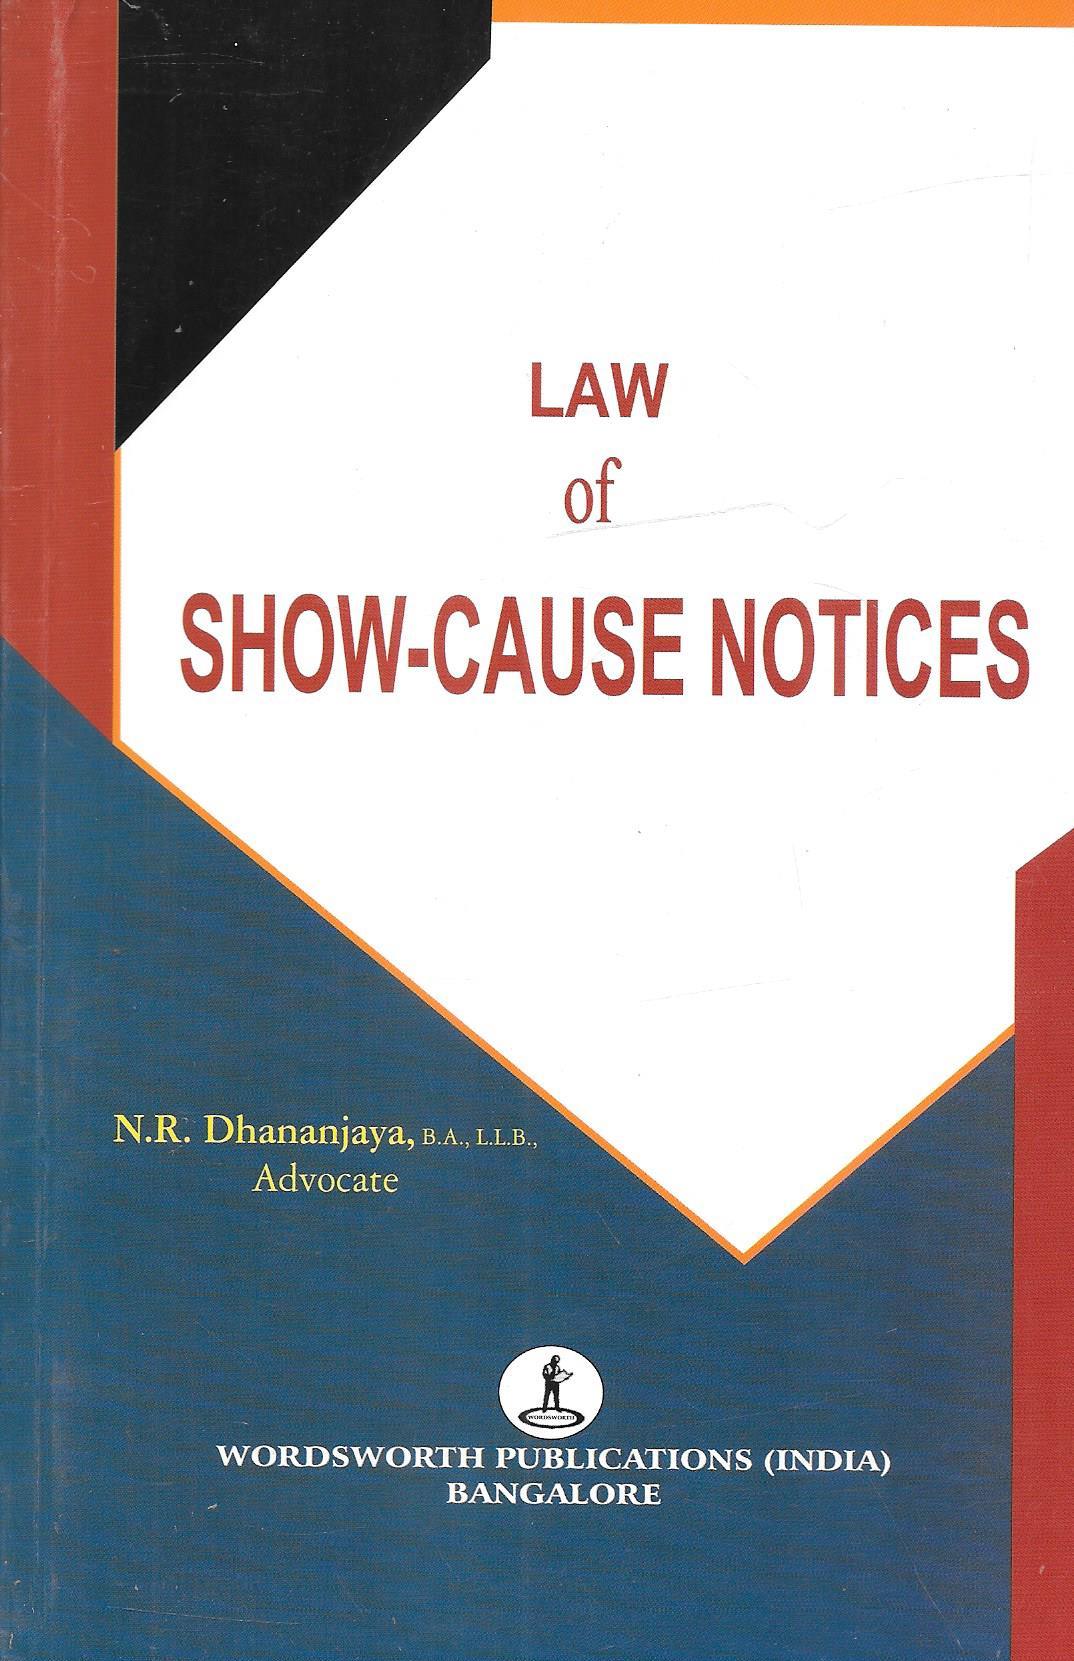 Law of Show-Cause Notices